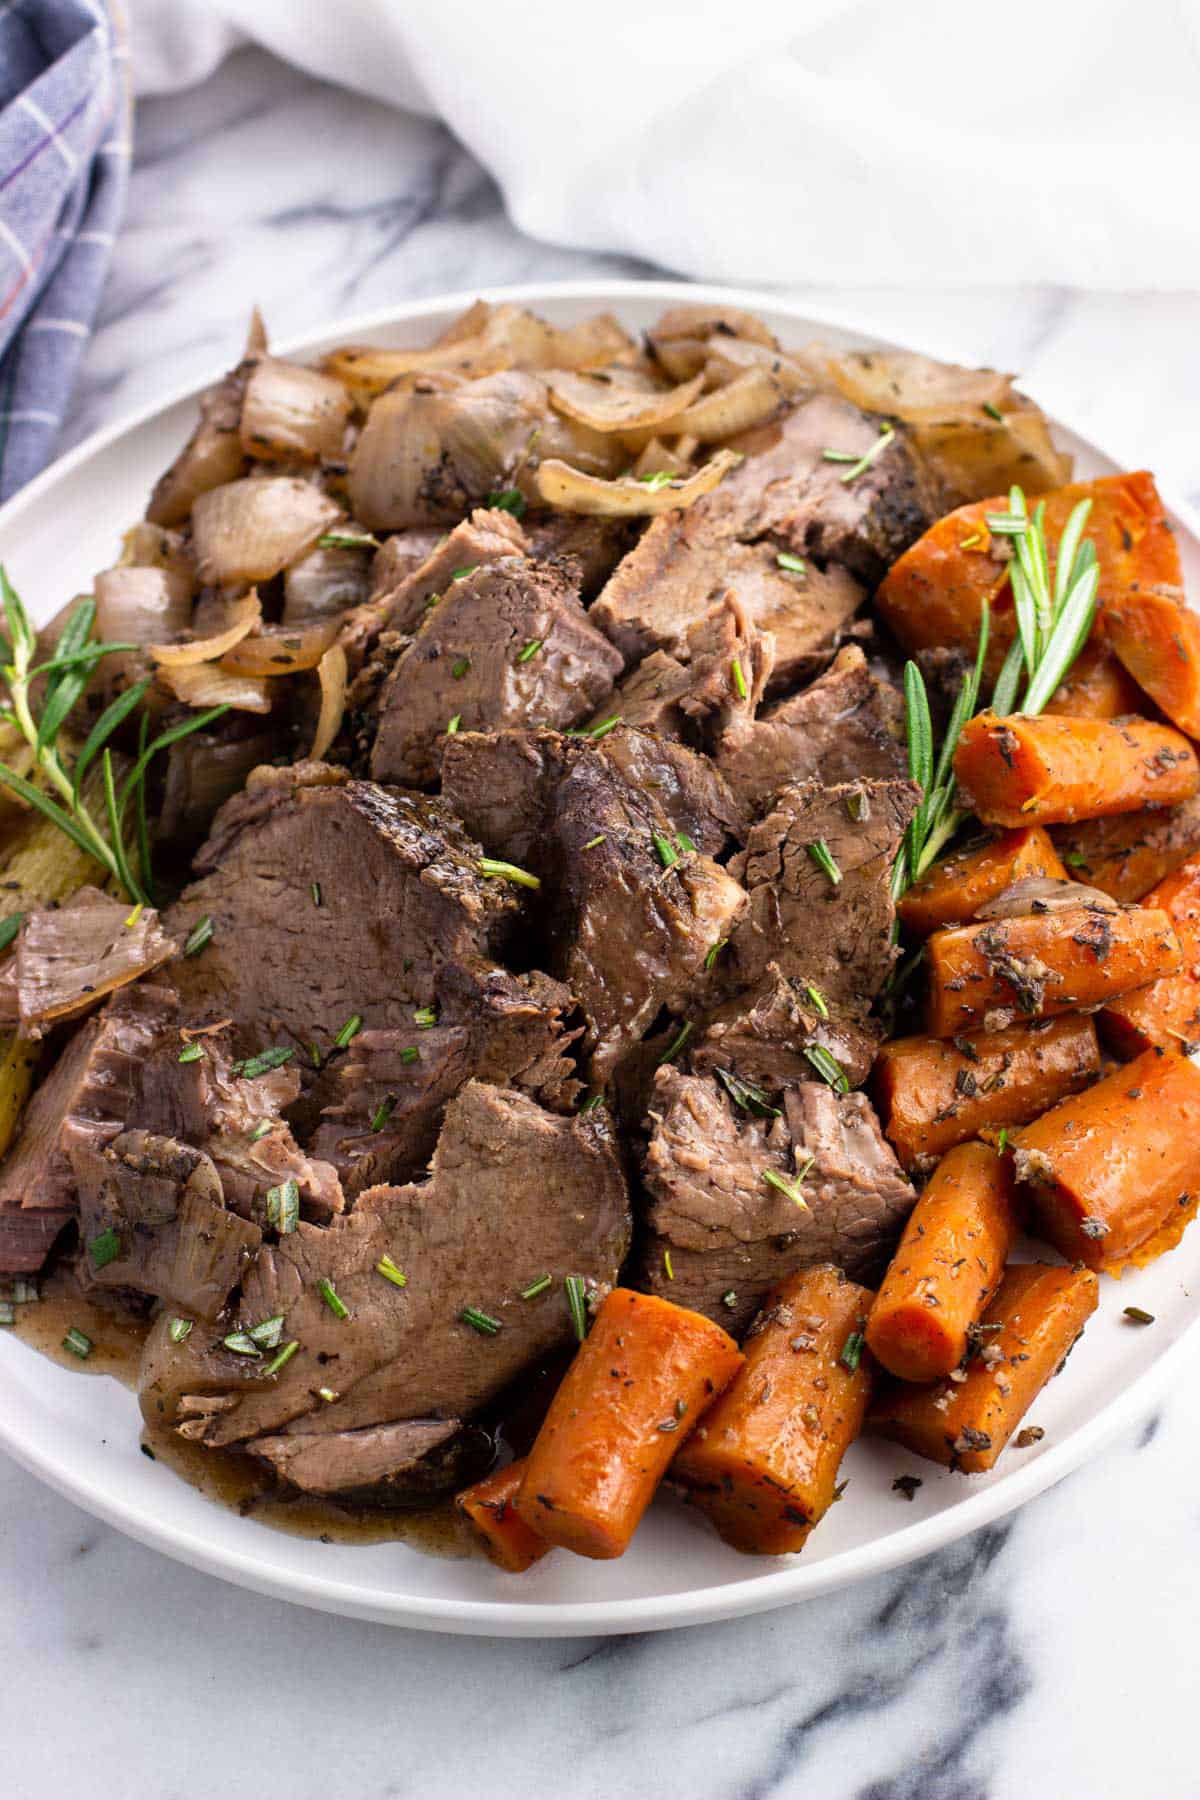 Sliced beef shoulder roast, carrots, celery, onions, and rosemary sprigs on a plate.